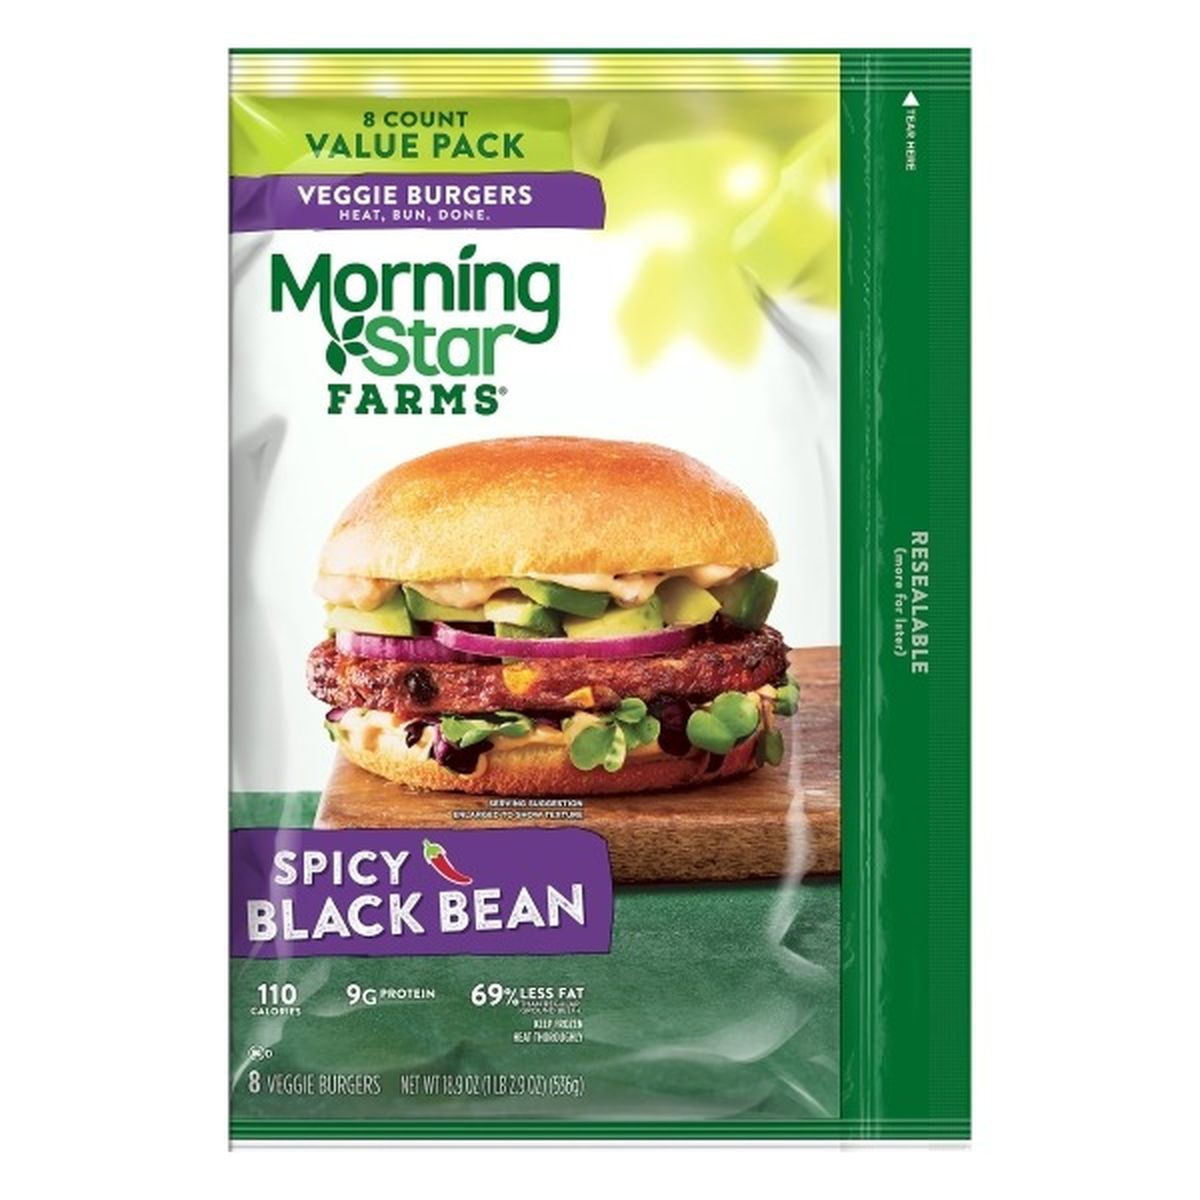 Calories in Morning Star Farms Veggie Burgers, Spicy Black Bean, Value Pack